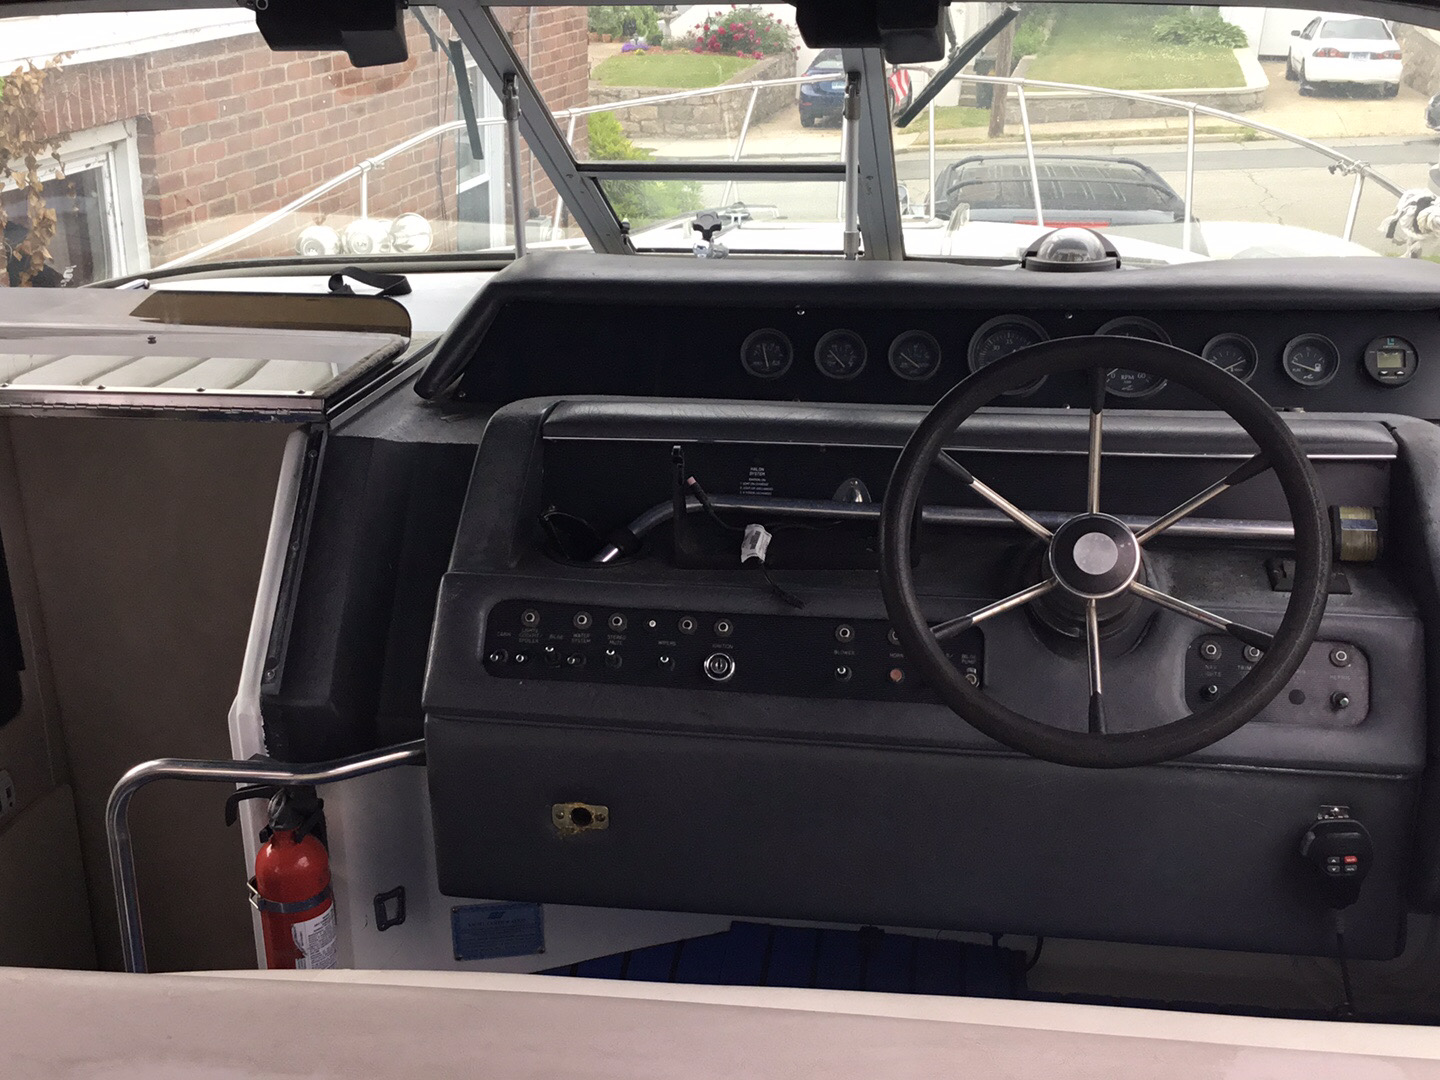 1993 30 foot Sea Ray Cabin CR Power boat for sale in New London, CT - image 18 